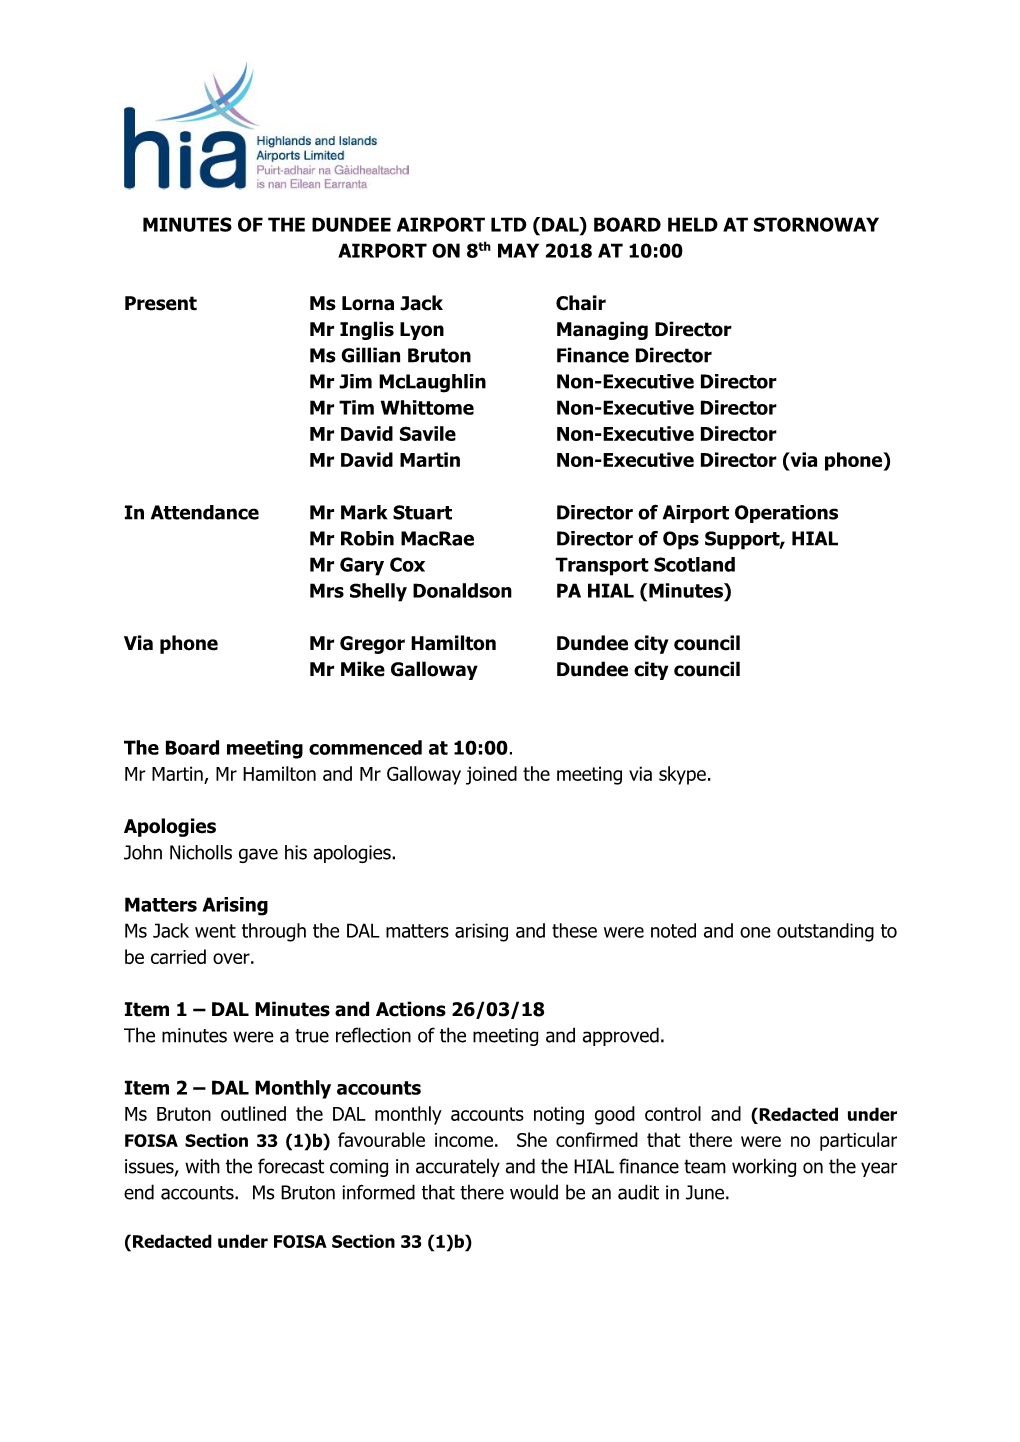 MINUTES of the DUNDEE AIRPORT LTD (DAL) BOARD HELD at STORNOWAY AIRPORT on 8Th MAY 2018 at 10:00